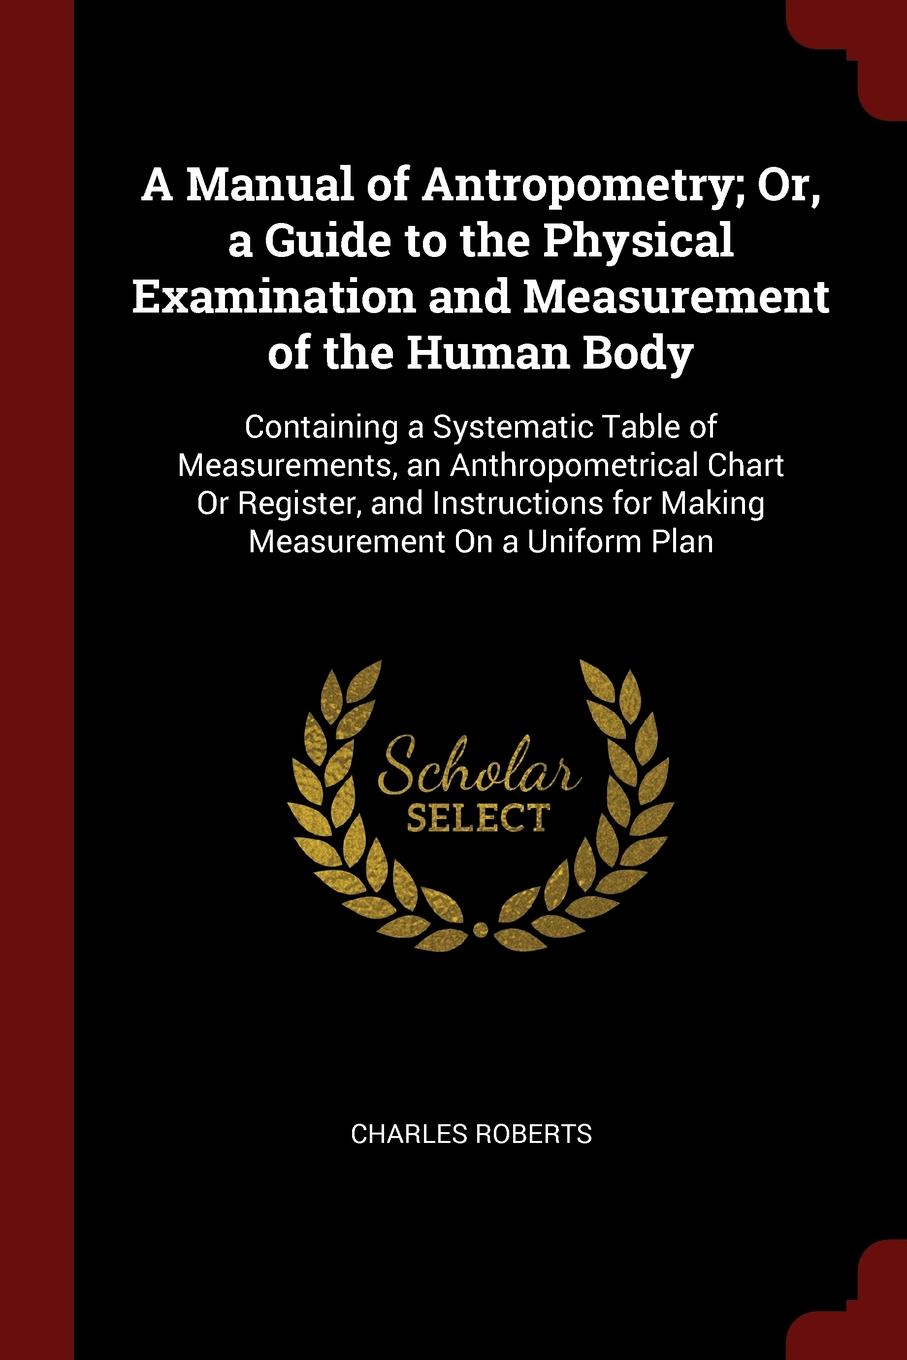 A Manual of Antropometry; Or, a Guide to the Physical Examination and Measurement of the Human Body. Containing a Systematic Table of Measurements, an Anthropometrical Chart Or Register, and Instructions for Making Measurement On a Uniform Plan